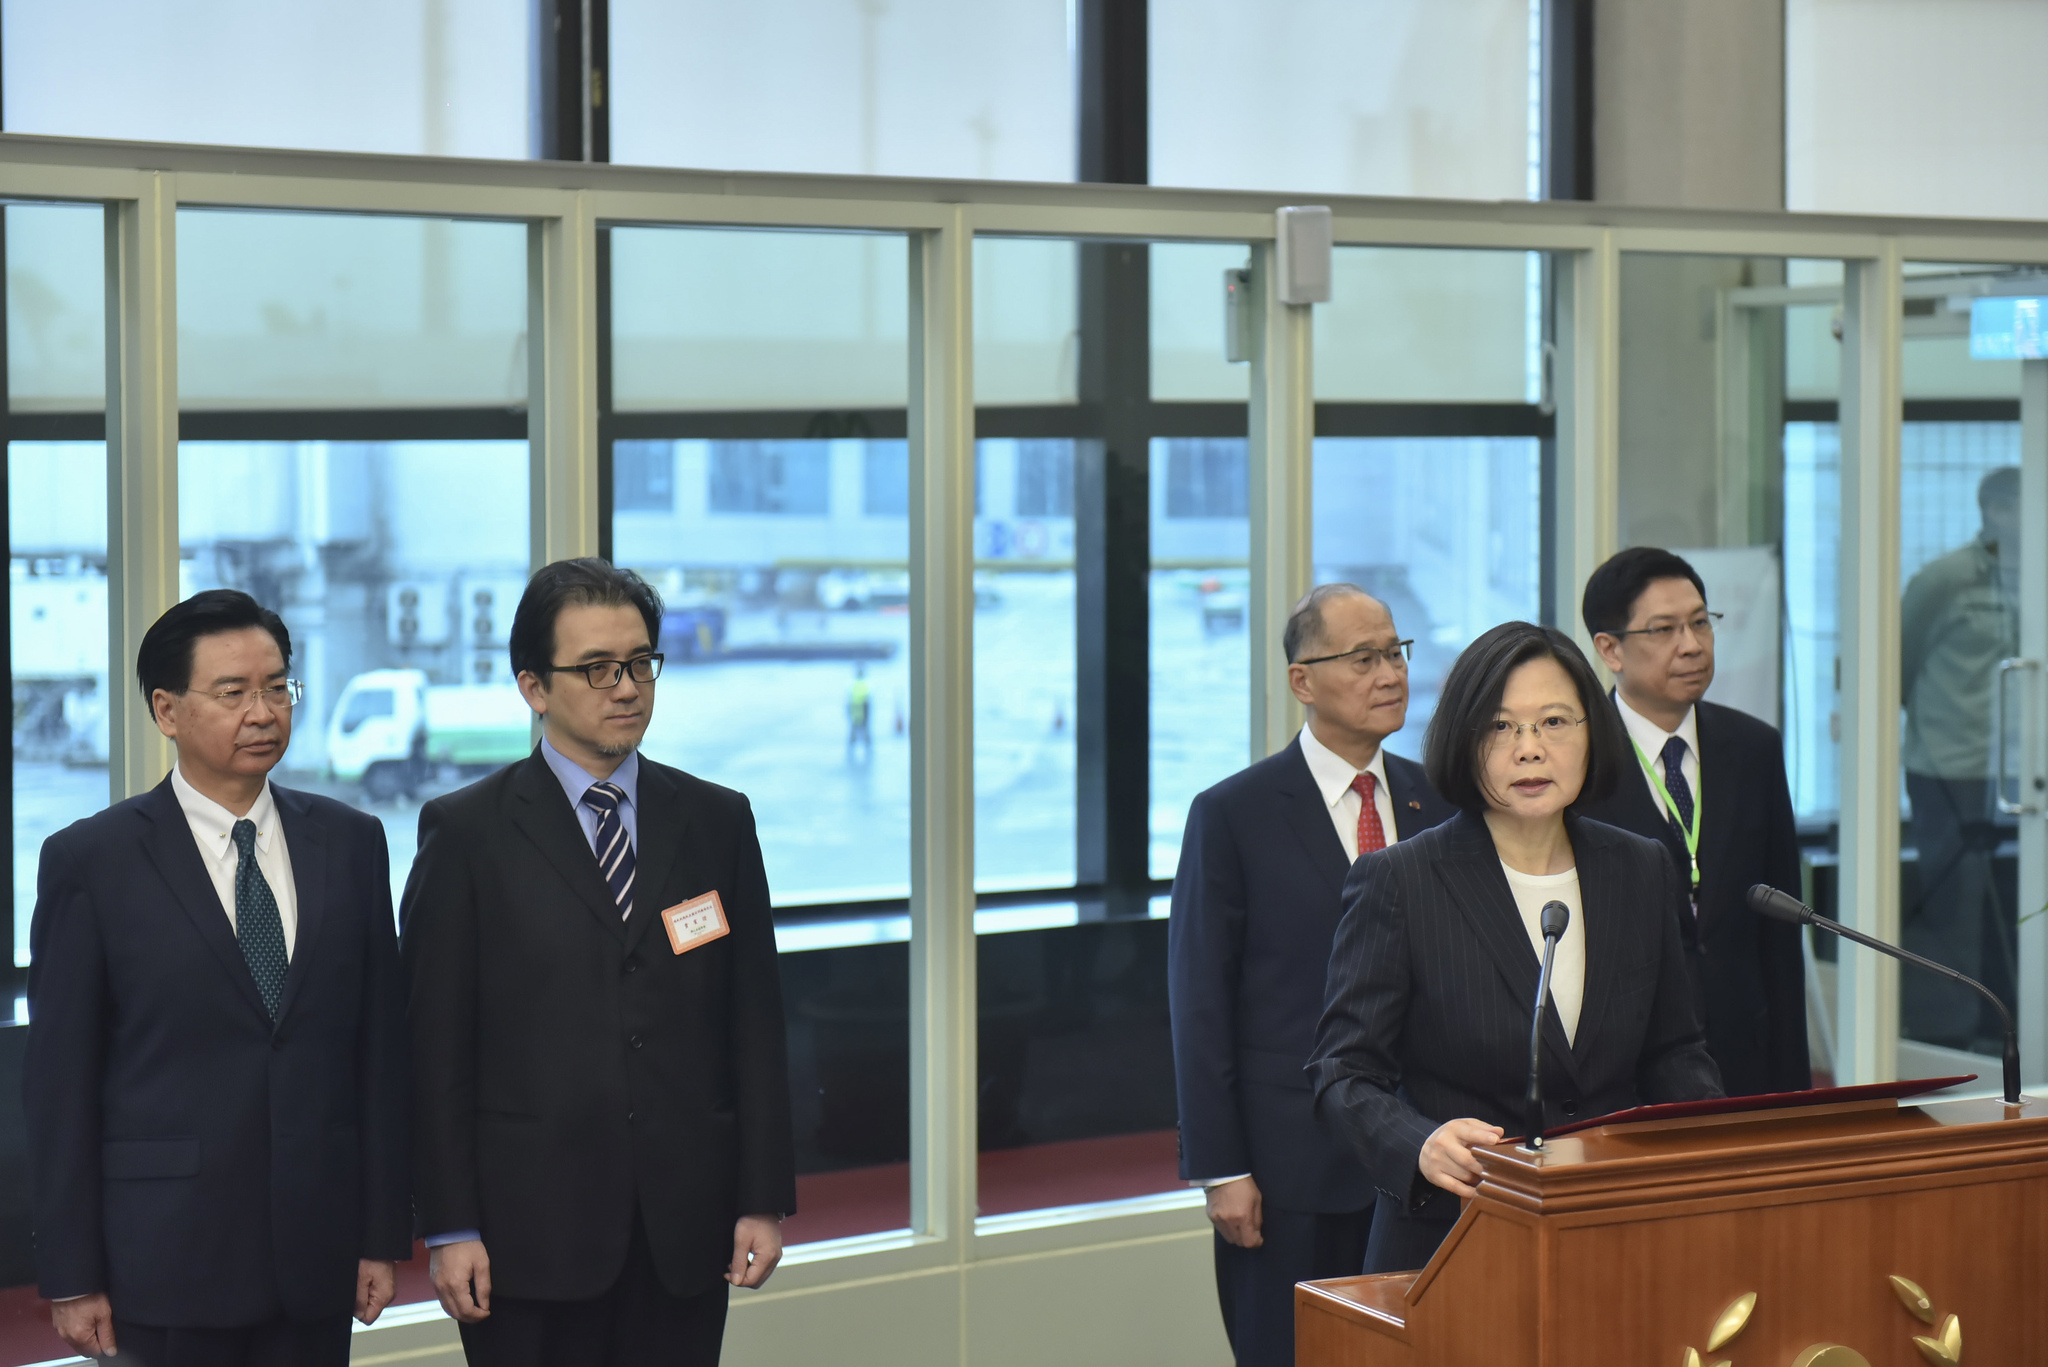 President Tsai explains trip objectives before departing for Swaziland